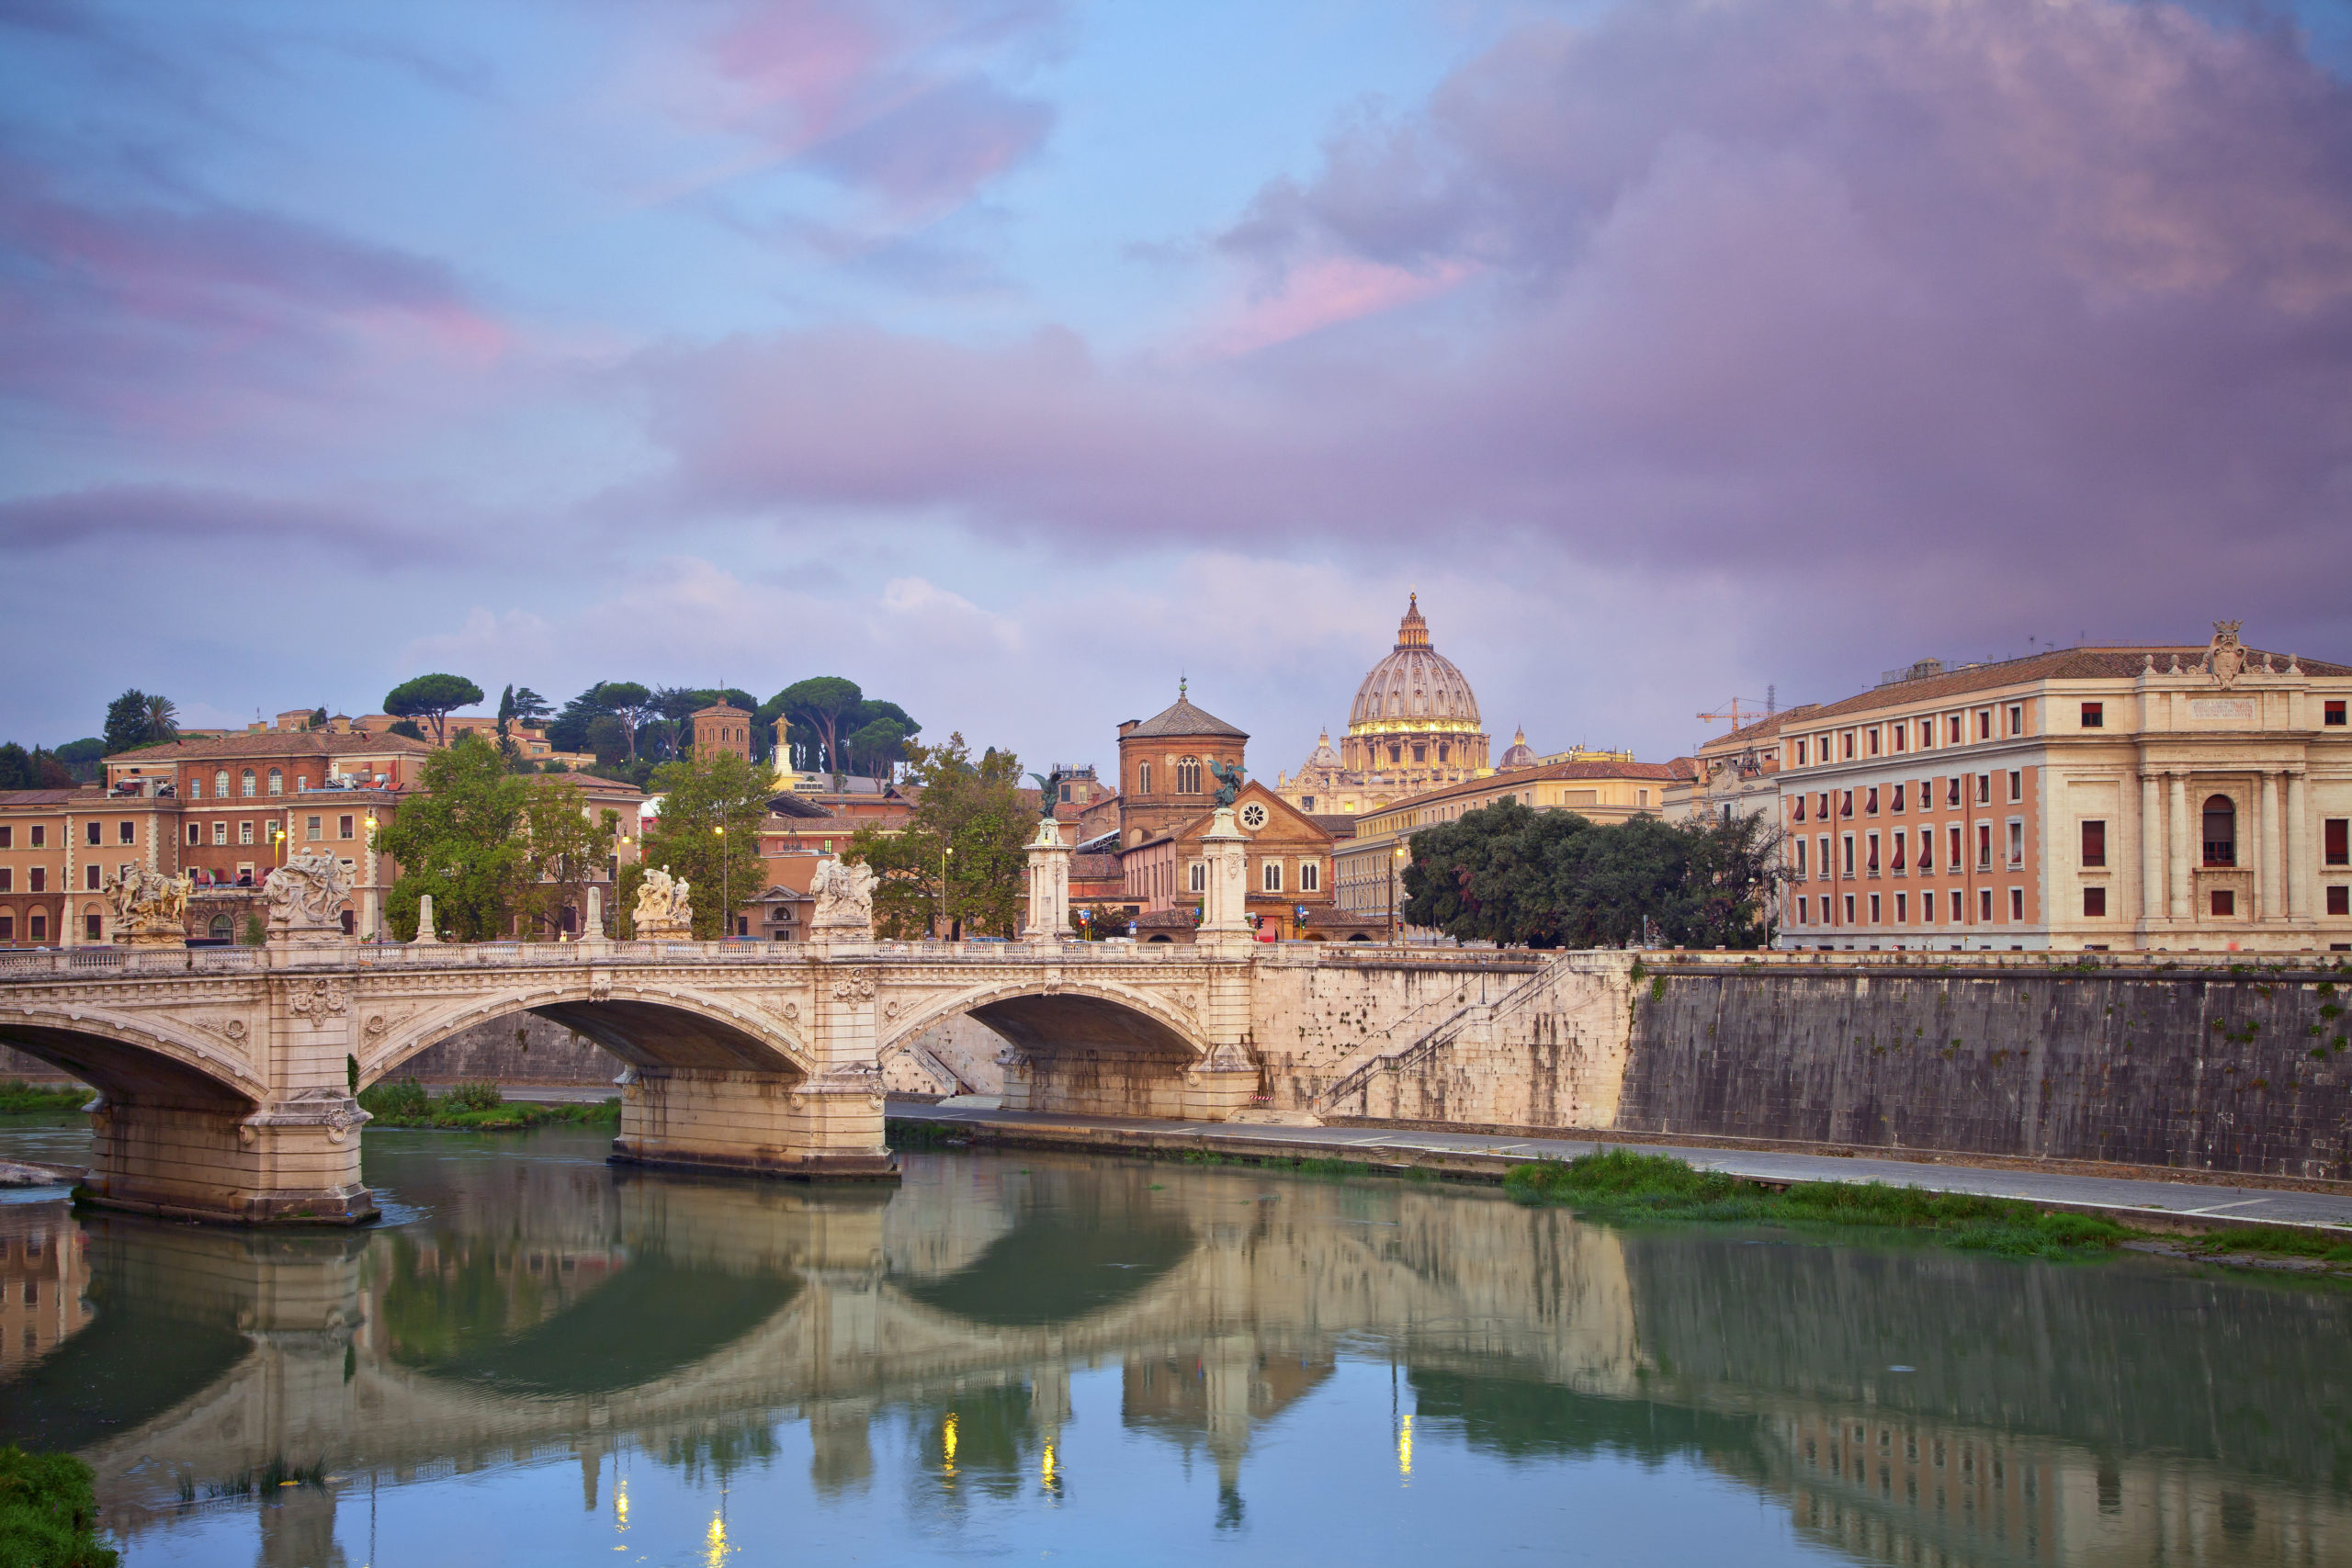 View of Vittorio Emanuele Bridge and the St. Peter's cathedral in Rome, Italy during beautiful sunrise.